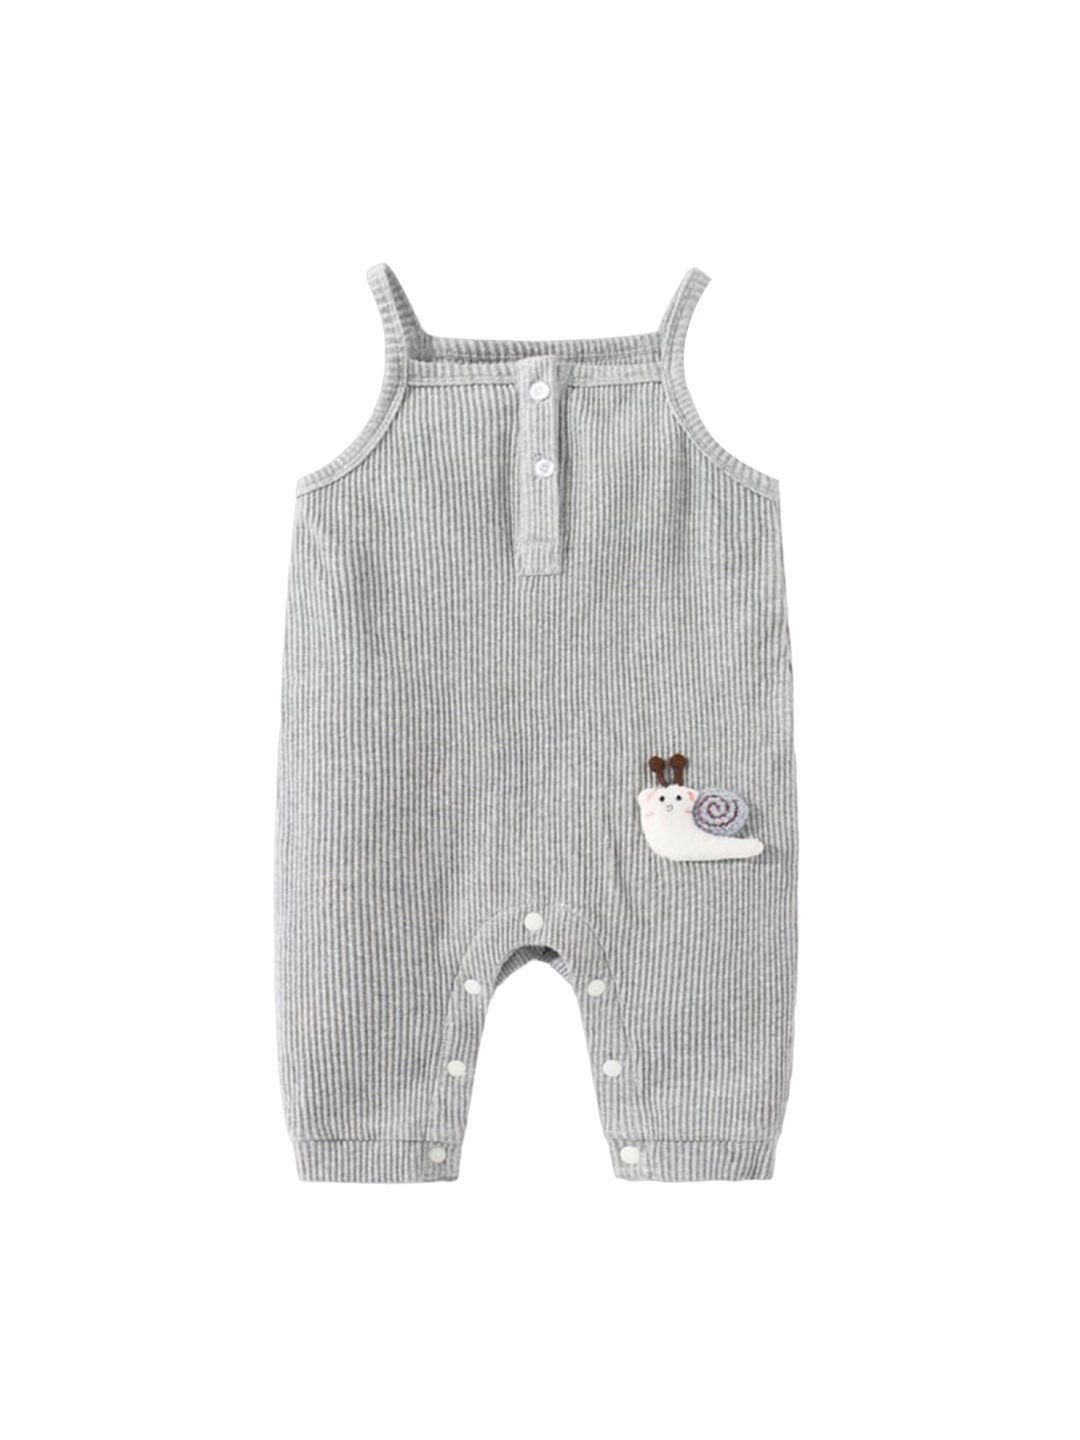 stylecast grey infants striped cotton rompers